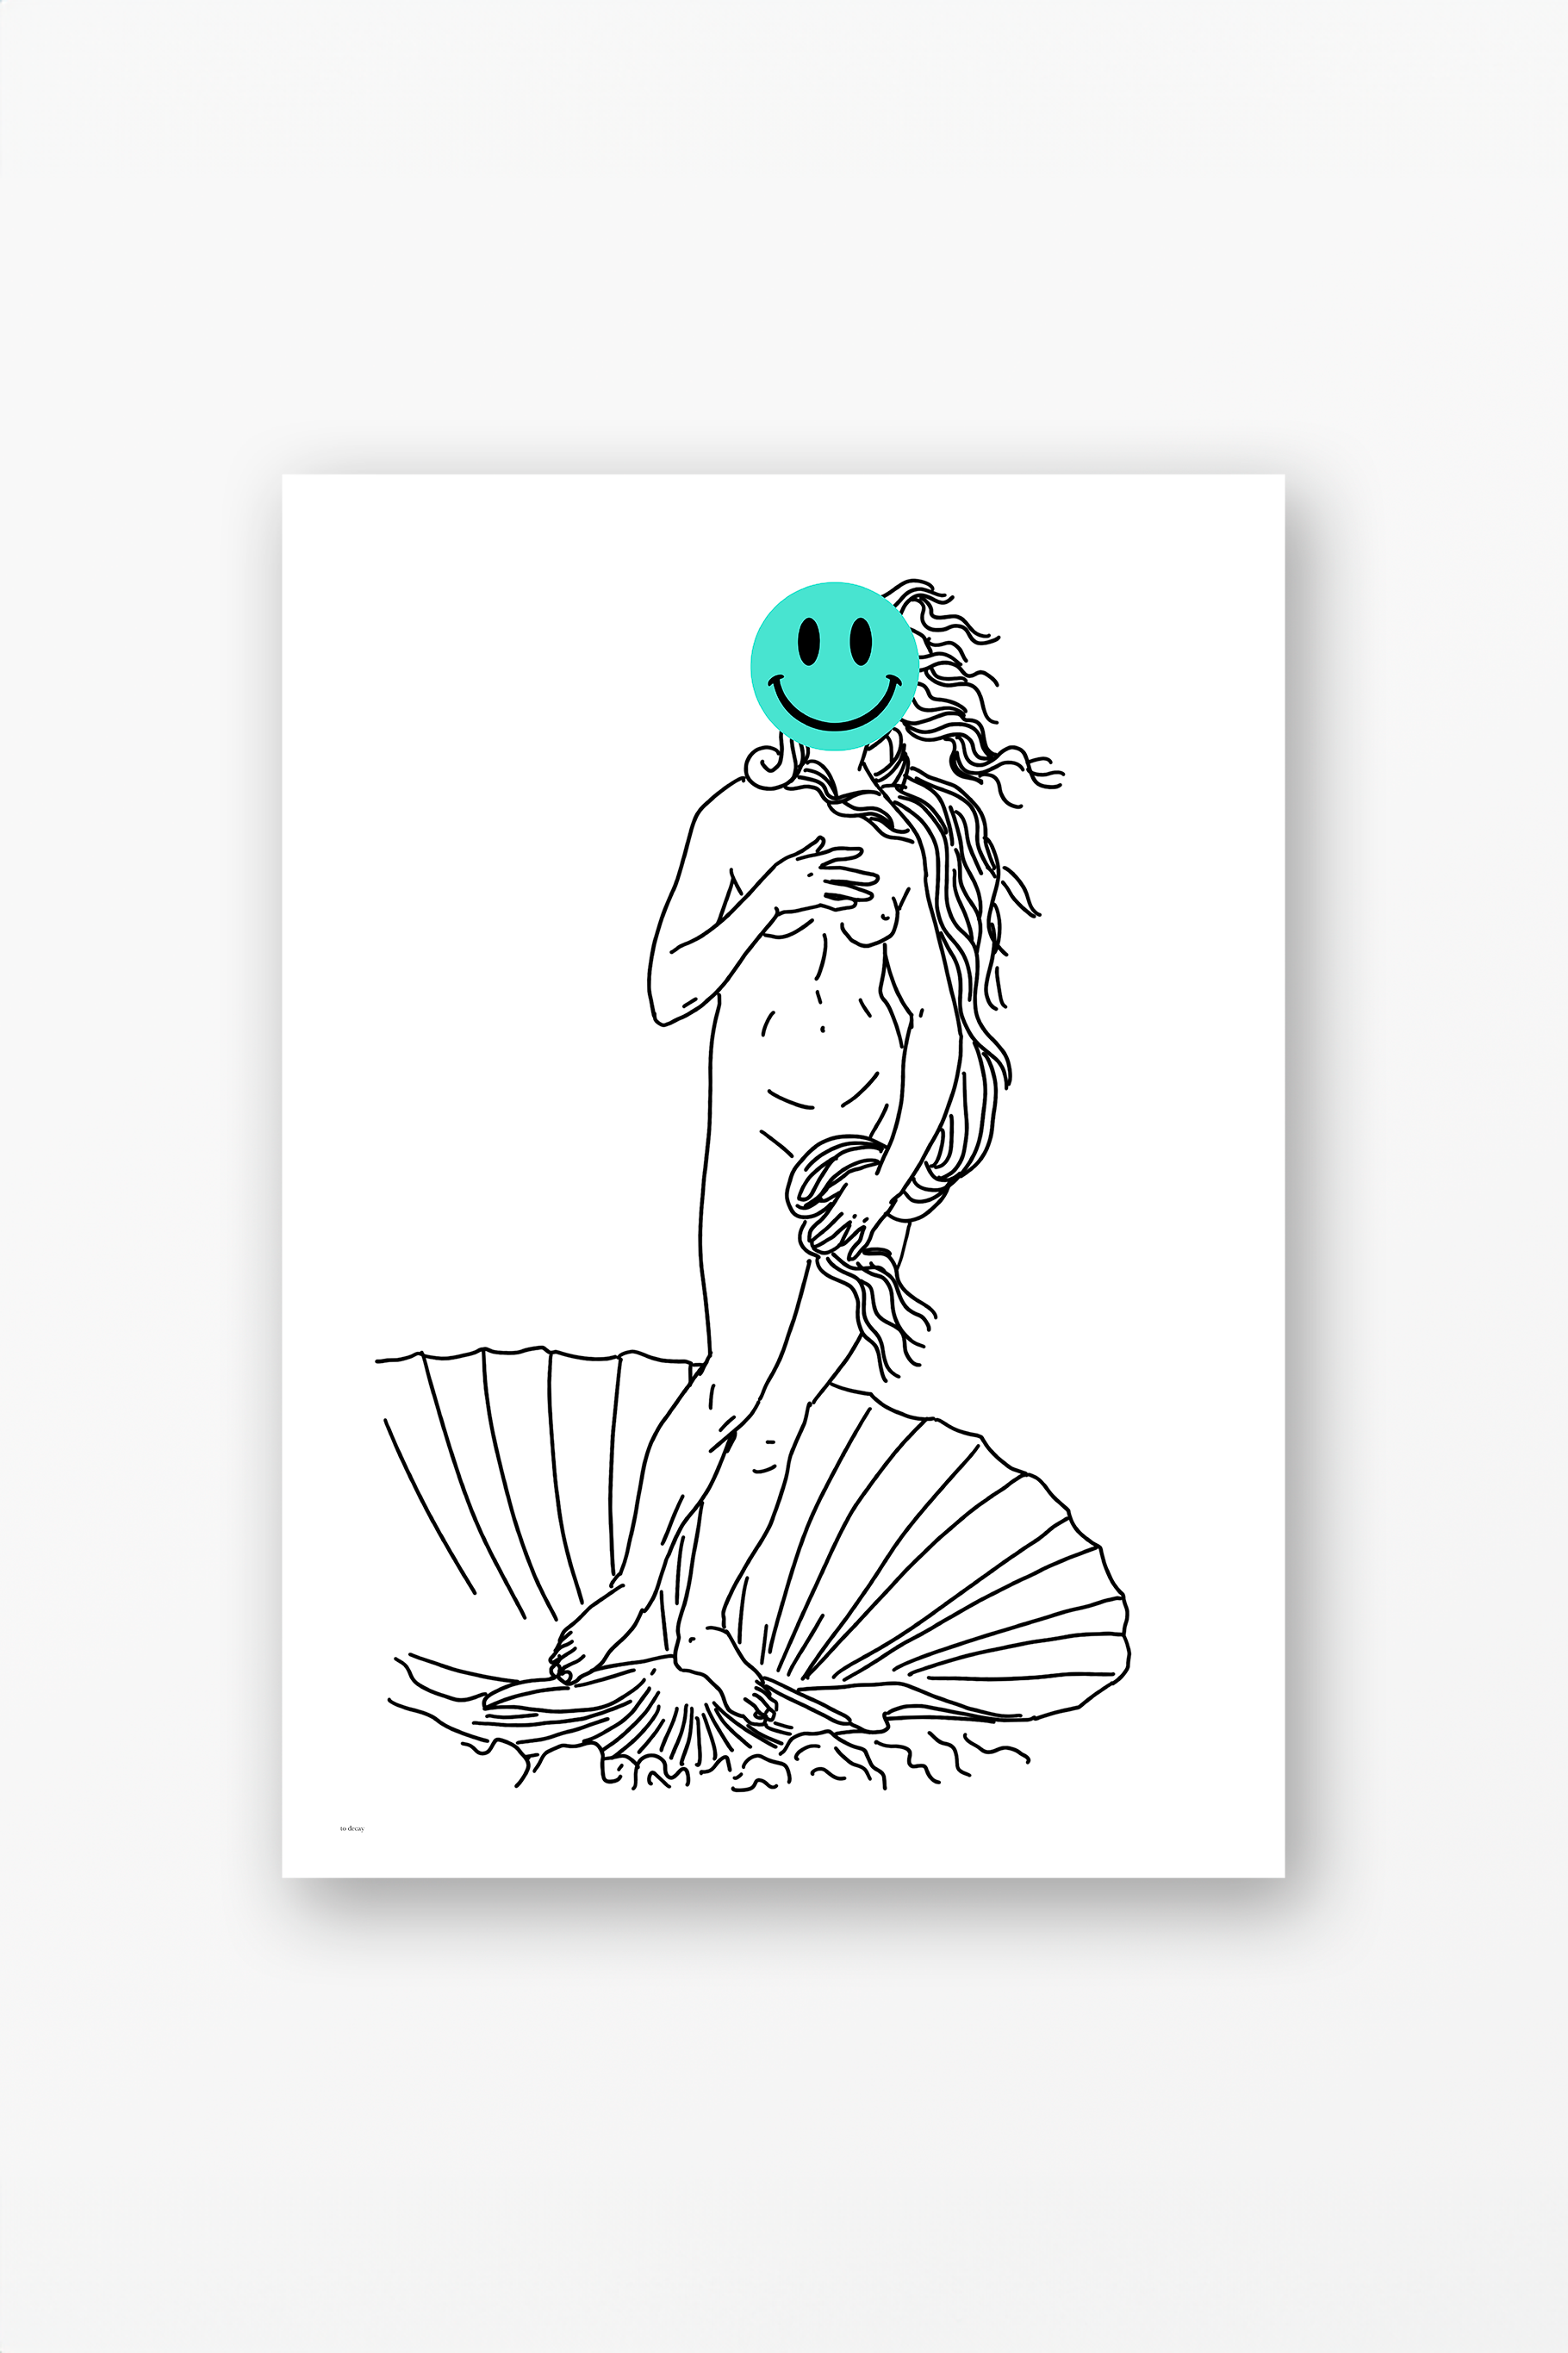 A Happy Venus Poster - to decay